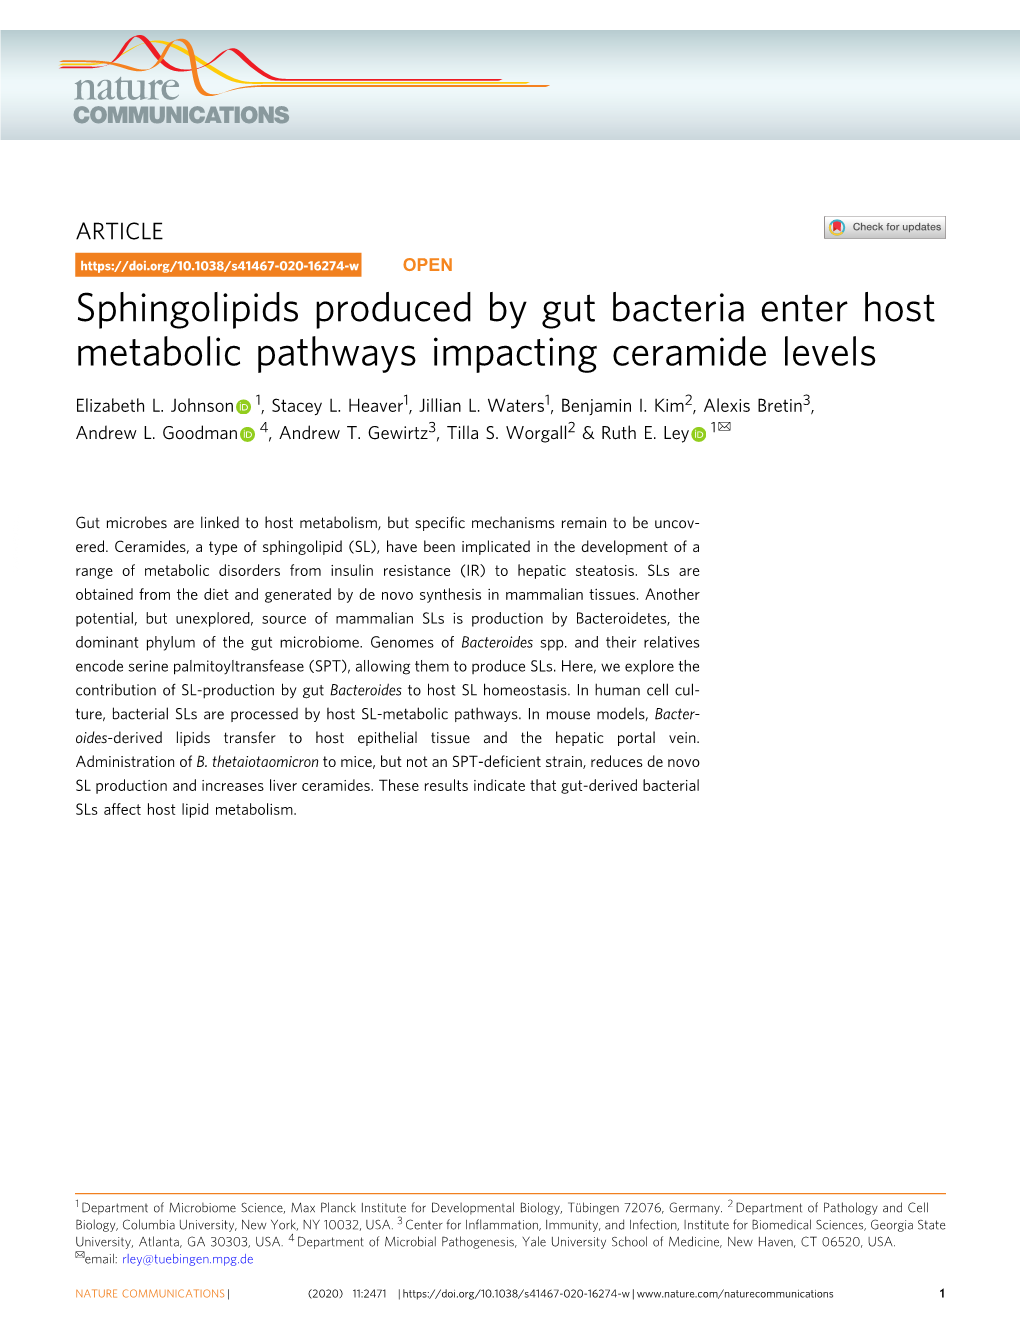 Sphingolipids Produced by Gut Bacteria Enter Host Metabolic Pathways Impacting Ceramide Levels